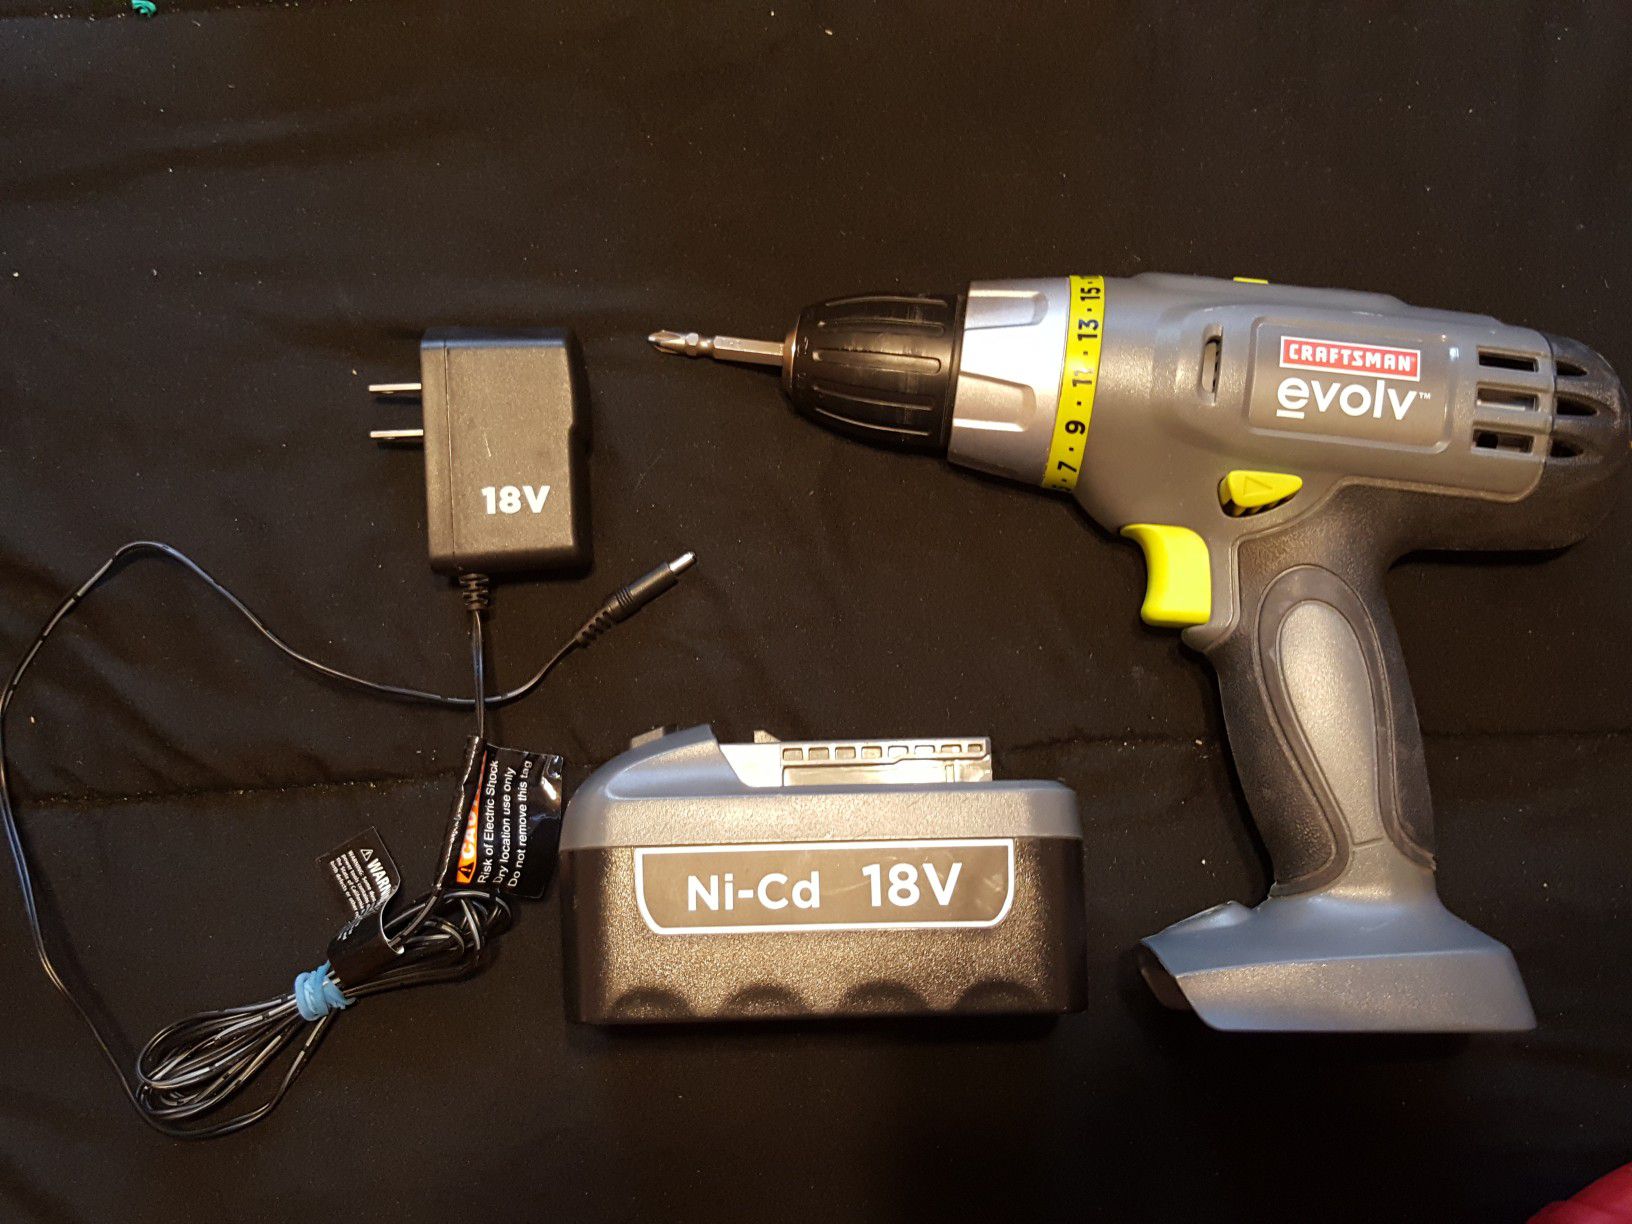 Craftsman EVOLV Rechargeable Drill/Driver